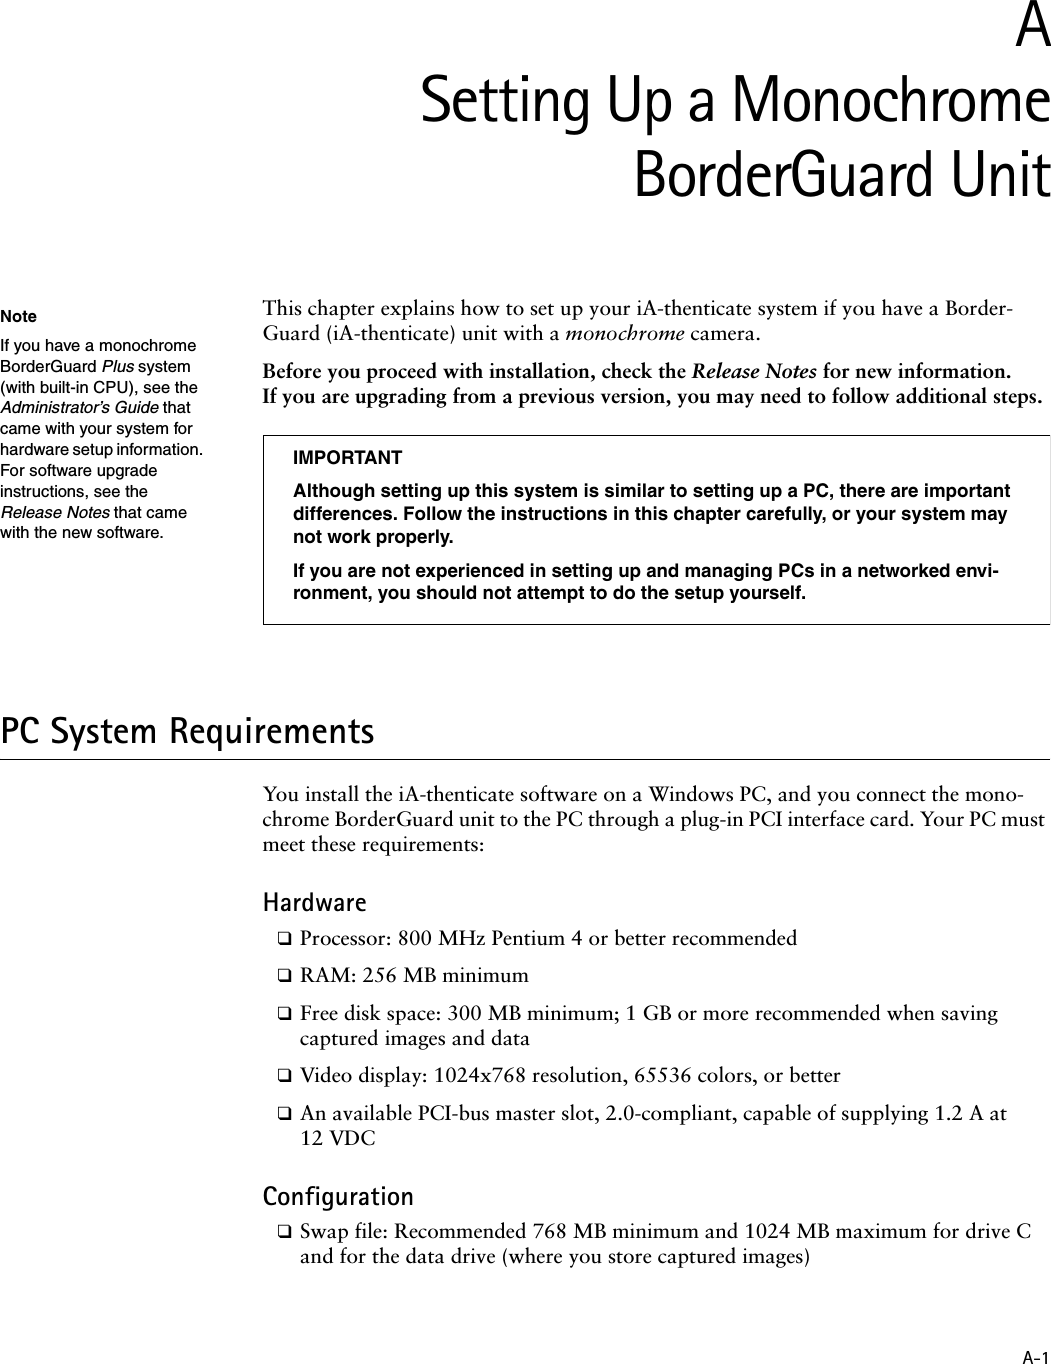 A-1ASetting Up a MonochromeBorderGuard UnitThis chapter explains how to set up your iA-thenticate system if you have a Border-Guard (iA-thenticate) unit with a monochrome camera.Before you proceed with installation, check the Release Notes for new information. If you are upgrading from a previous version, you may need to follow additional steps.PC System RequirementsYou install the iA-thenticate software on a Windows PC, and you connect the mono-chrome BorderGuard unit to the PC through a plug-in PCI interface card. Your PC must meet these requirements:Hardware❑Processor: 800 MHz Pentium 4 or better recommended❑RAM: 256 MB minimum❑Free disk space: 300 MB minimum; 1 GB or more recommended when saving captured images and data❑Video display: 1024x768 resolution, 65536 colors, or better❑An available PCI-bus master slot, 2.0-compliant, capable of supplying 1.2 A at 12 VDCConfiguration❑Swap file: Recommended 768 MB minimum and 1024 MB maximum for drive C and for the data drive (where you store captured images)NoteIf you have a monochrome BorderGuard Plus system (with built-in CPU), see the Administrator’s Guide that came with your system for hardware setup information. For software upgrade instructions, see the Release Notes that came with the new software.IMPORTANTAlthough setting up this system is similar to setting up a PC, there are important differences. Follow the instructions in this chapter carefully, or your system may not work properly.If you are not experienced in setting up and managing PCs in a networked envi-ronment, you should not attempt to do the setup yourself.